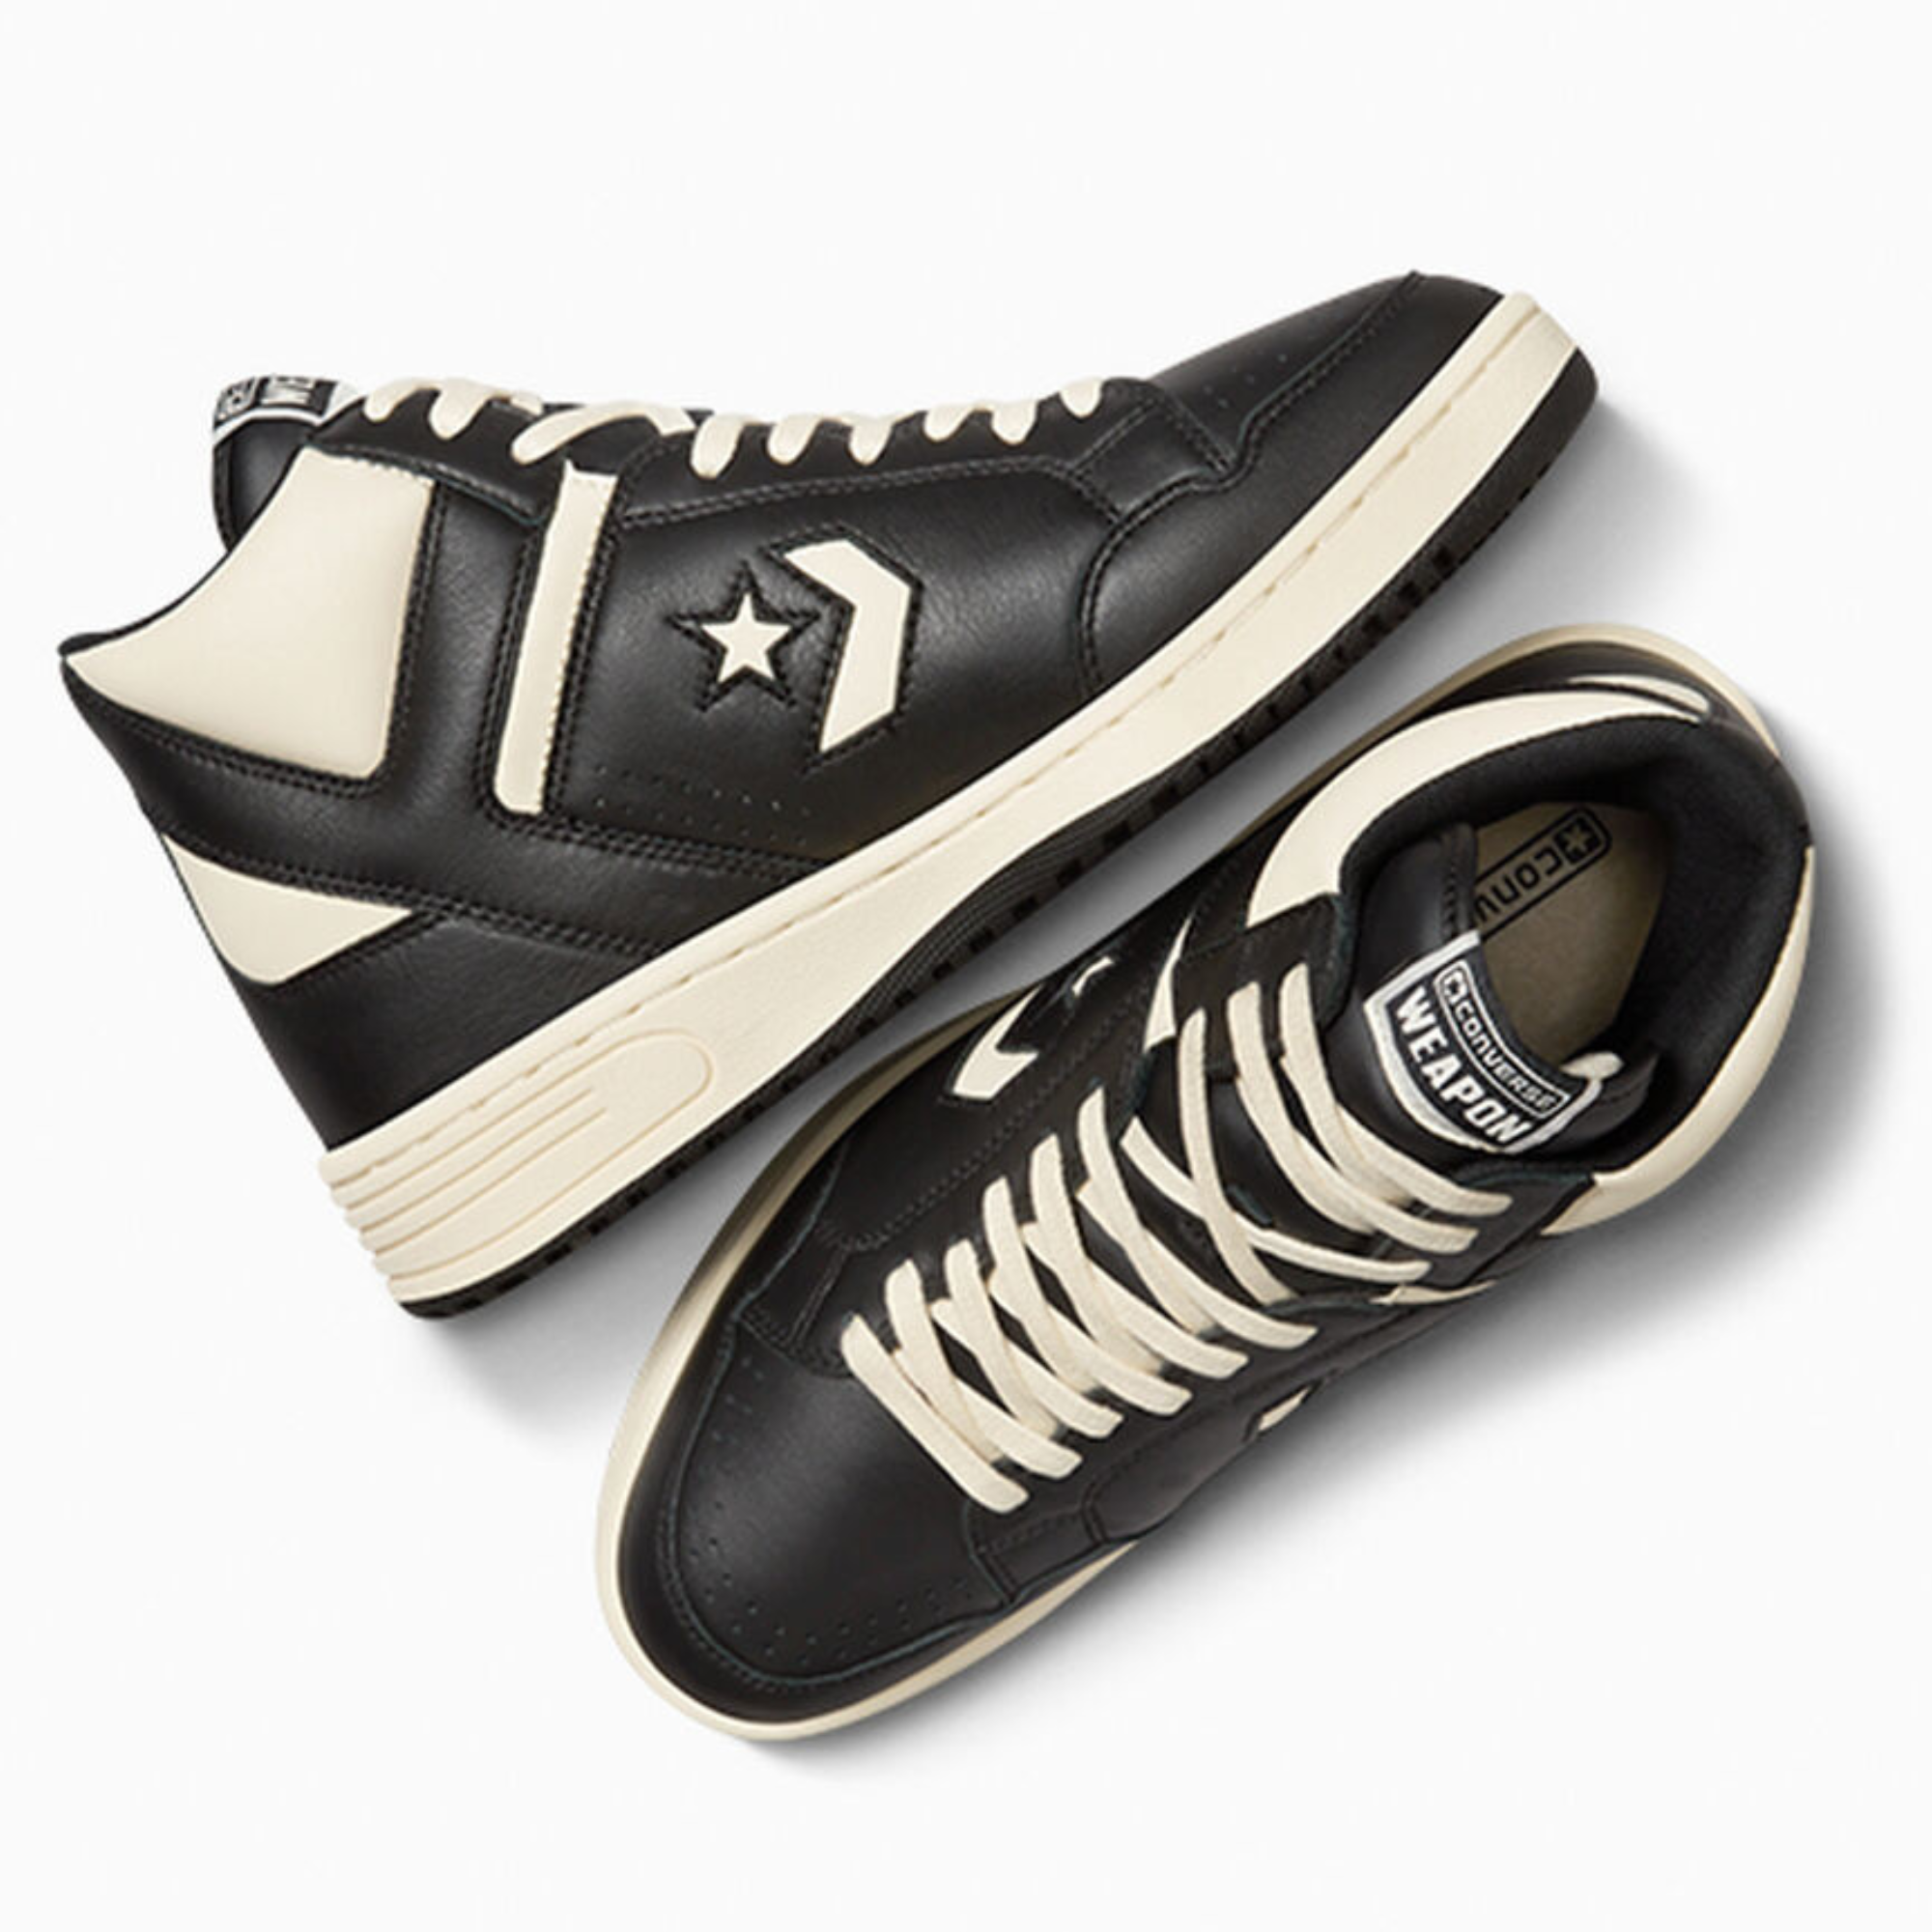 Converse Weapon Mid Black Natural